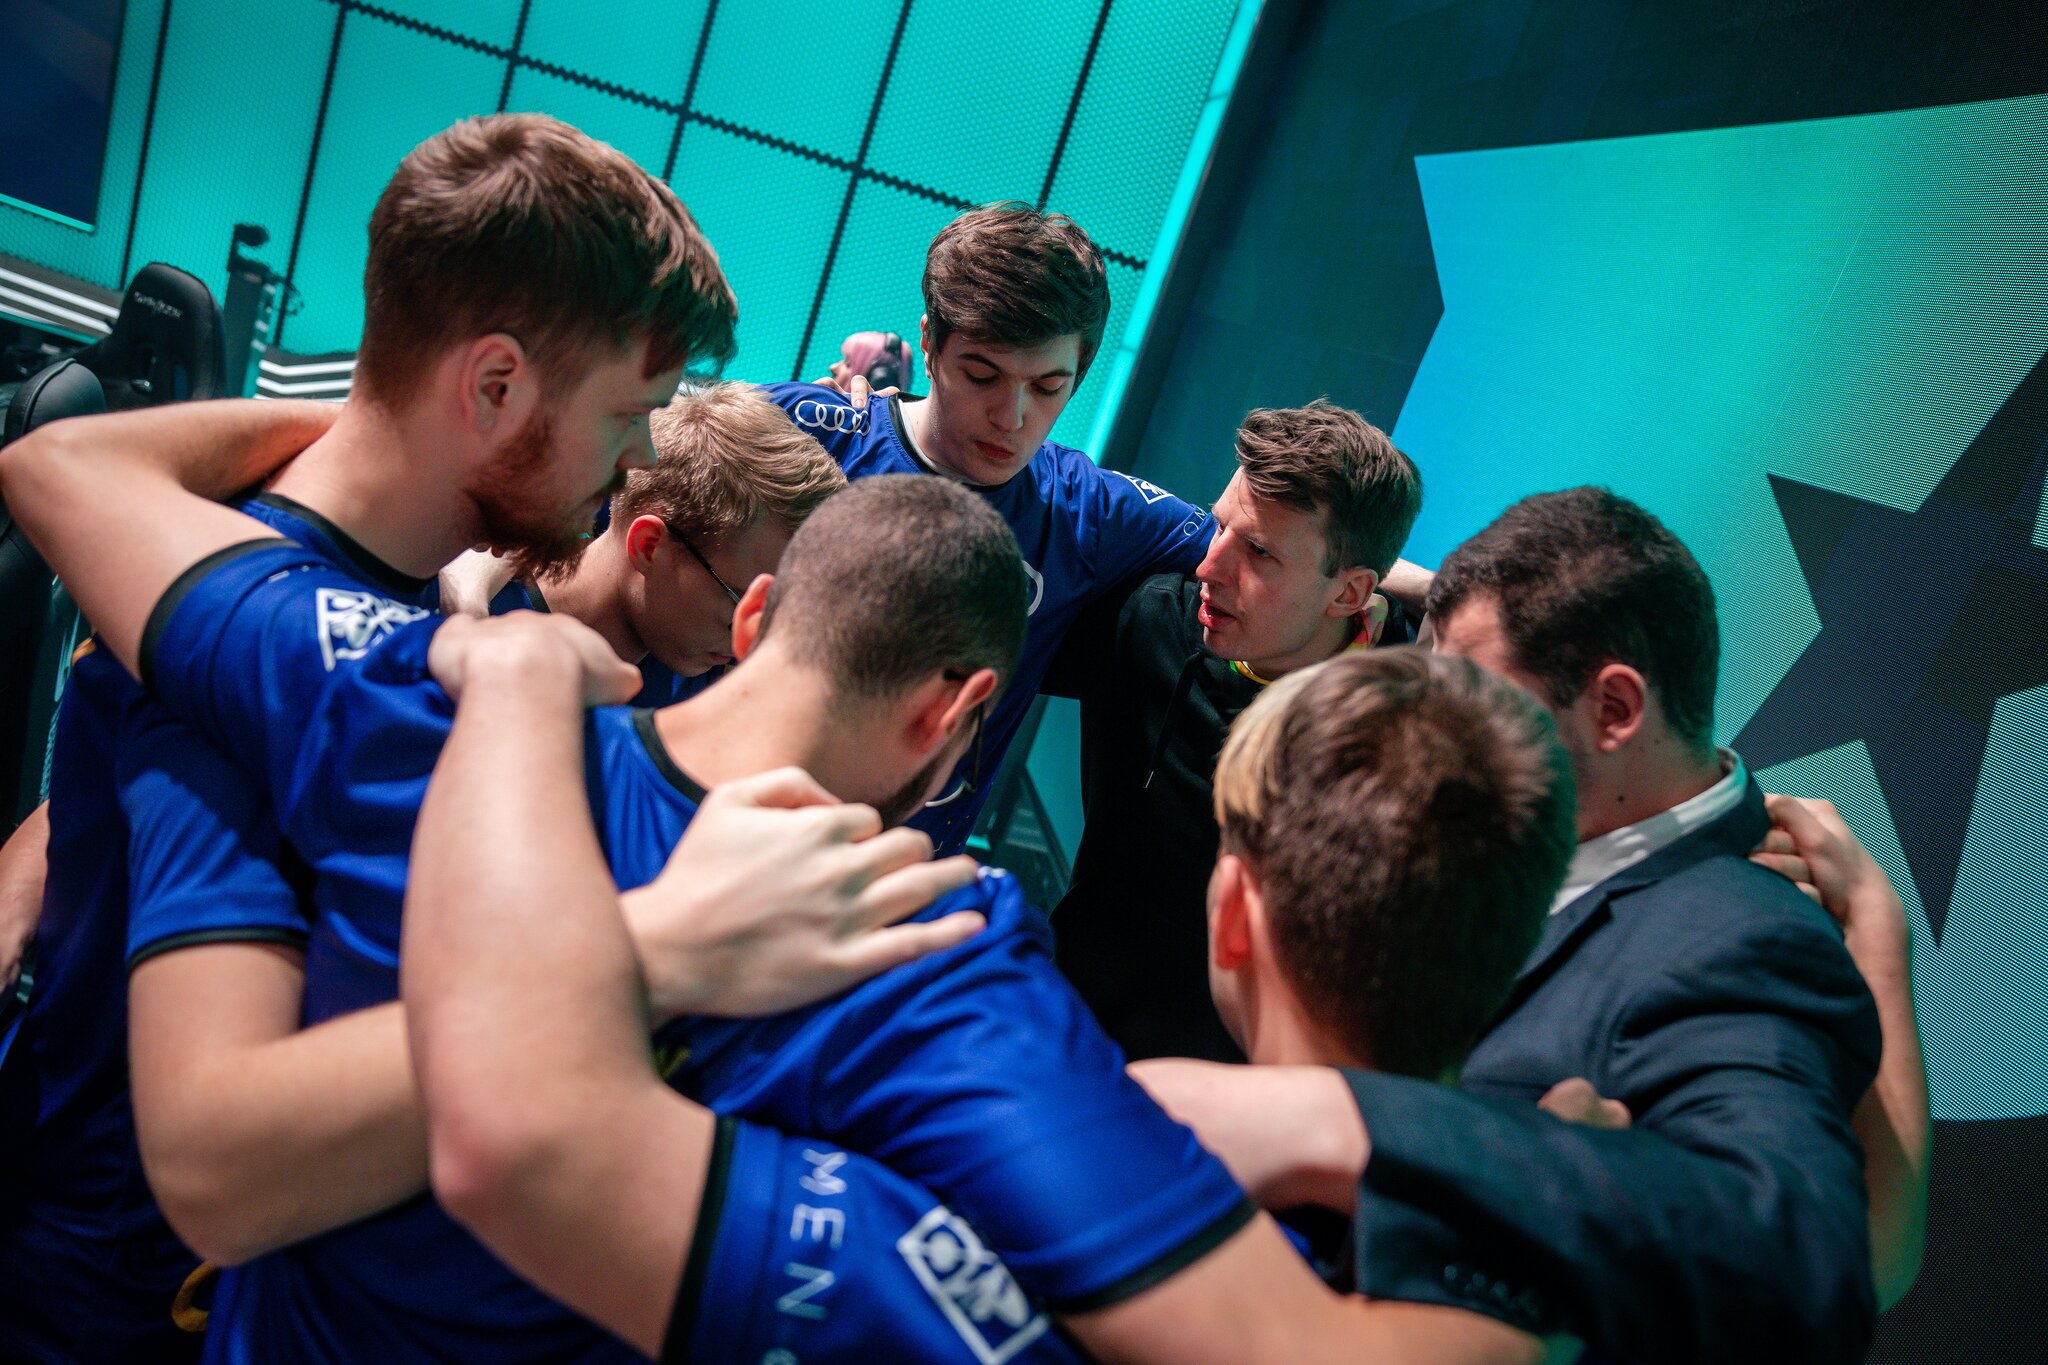 Origen entered the week in the middle of the pack, a big outing has them surging.